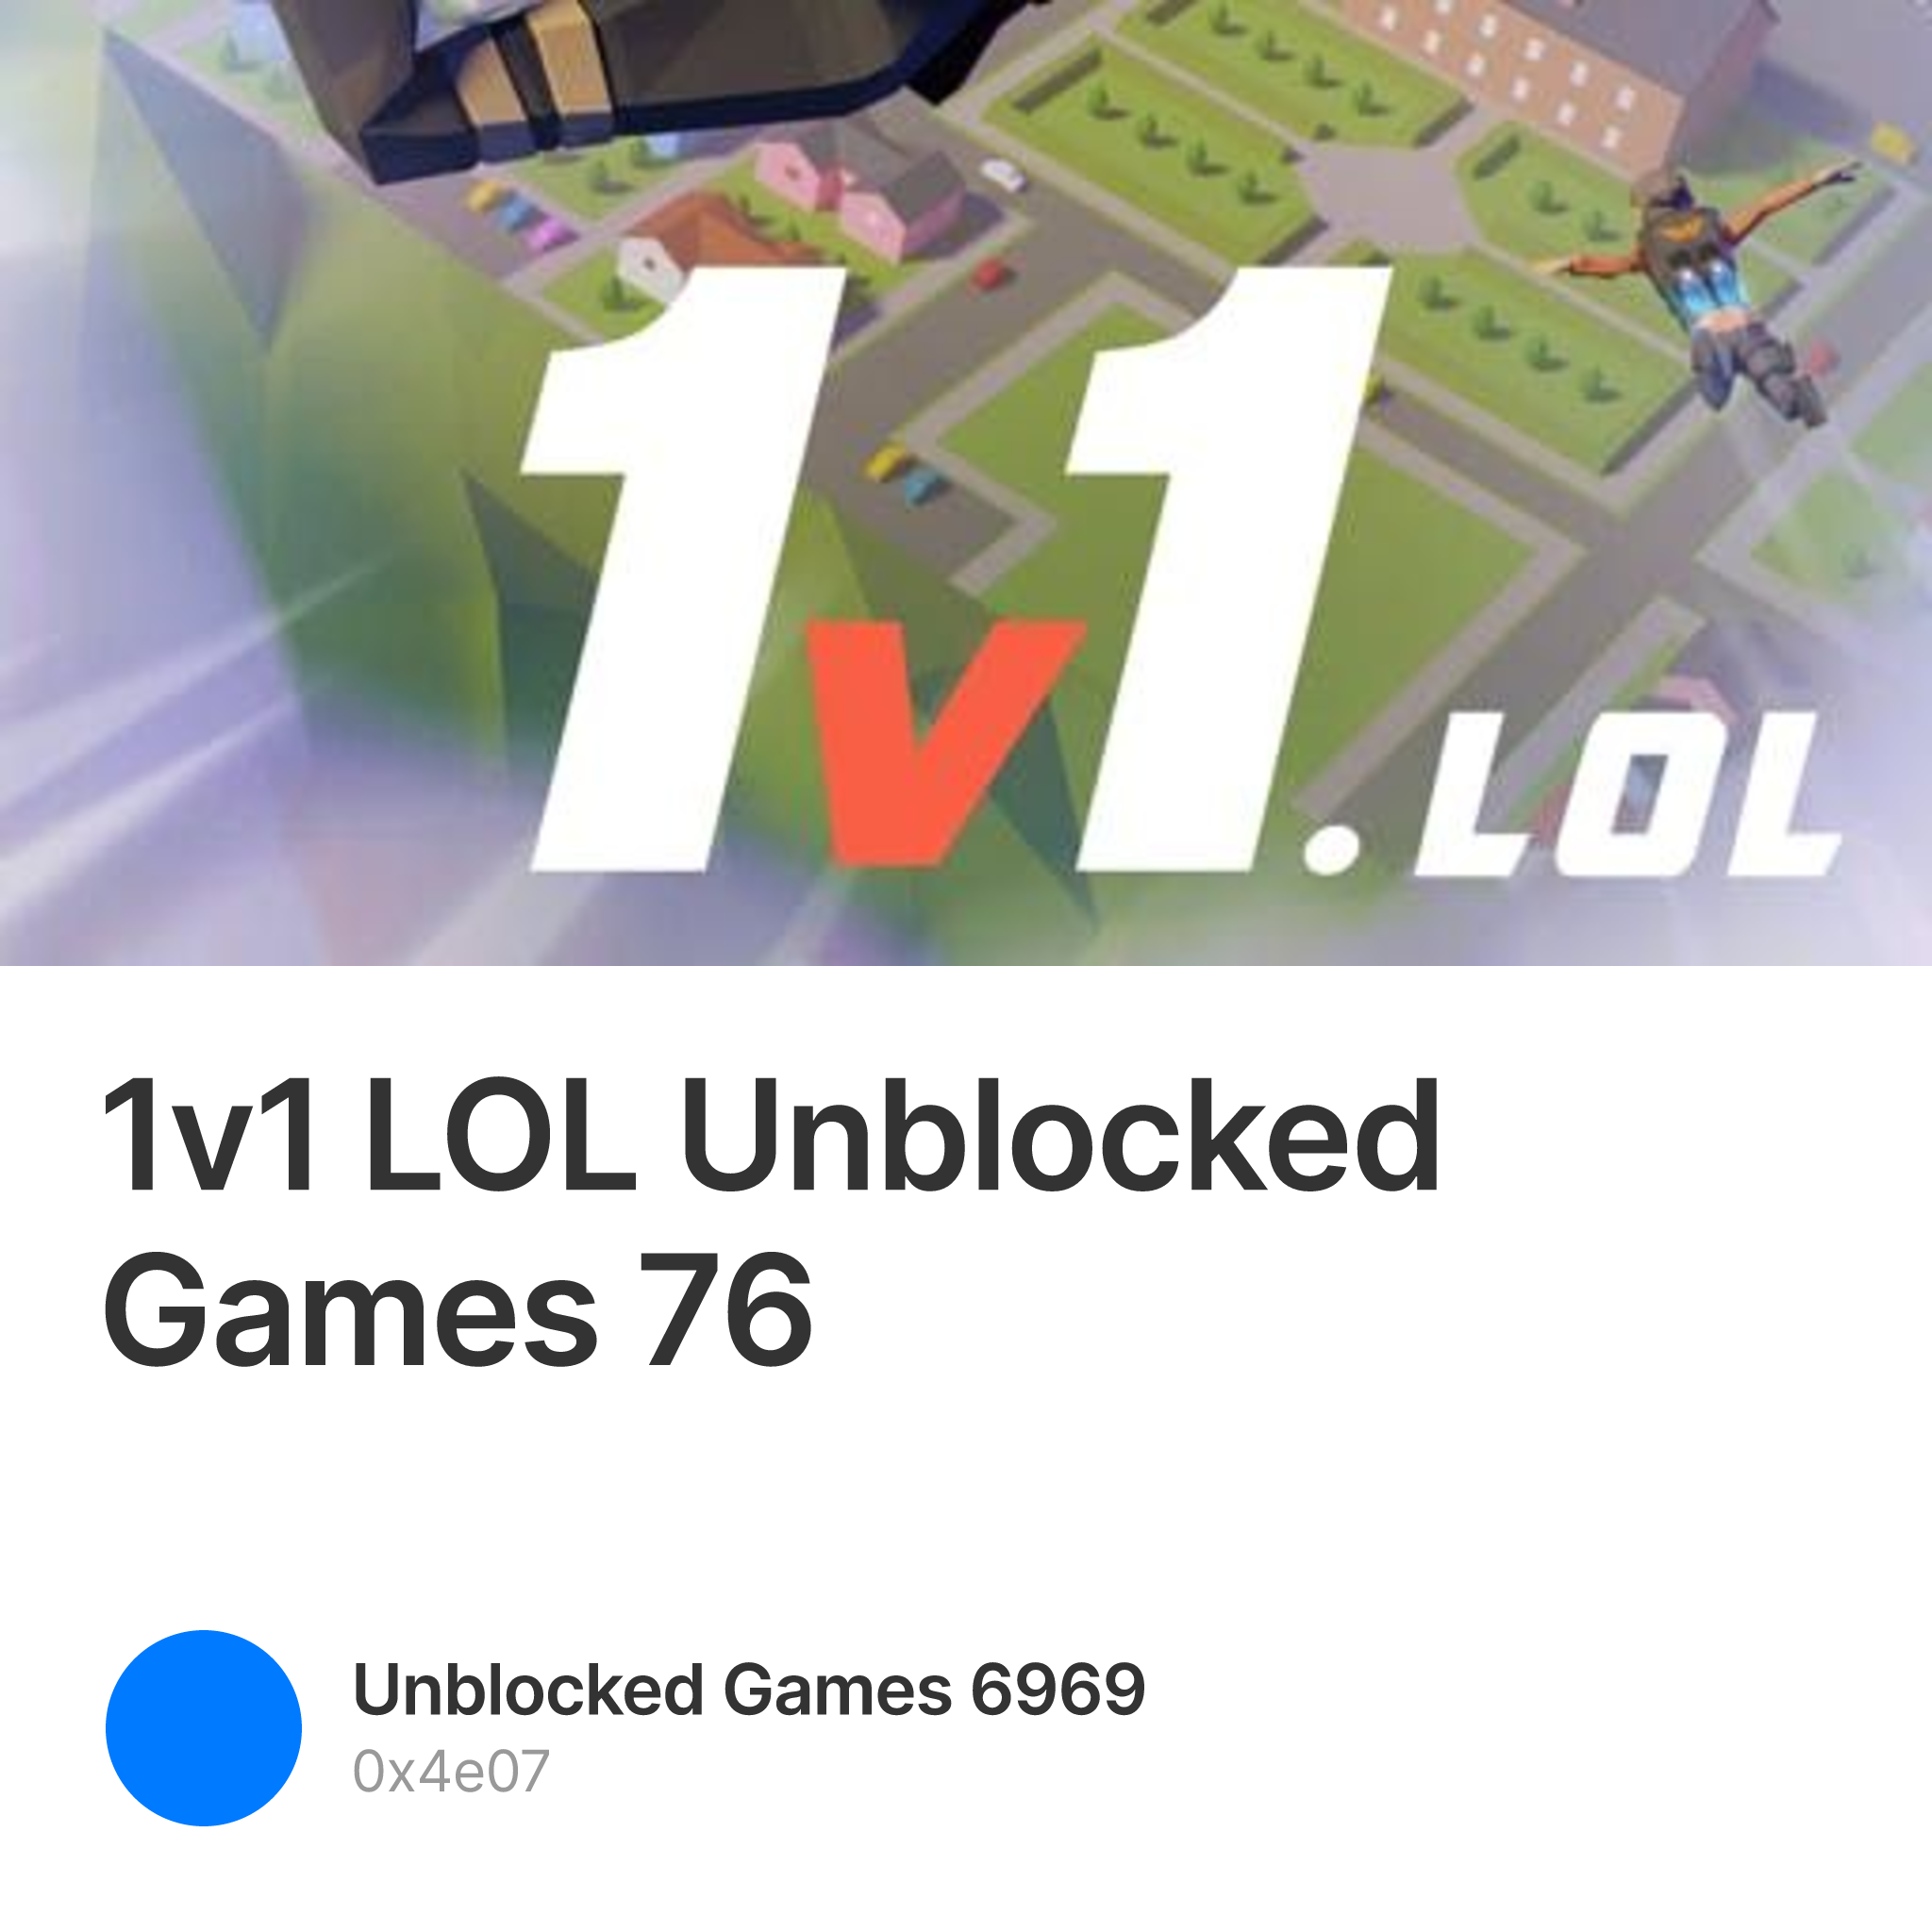 Unblocked Games 76: Get Instant Access Here